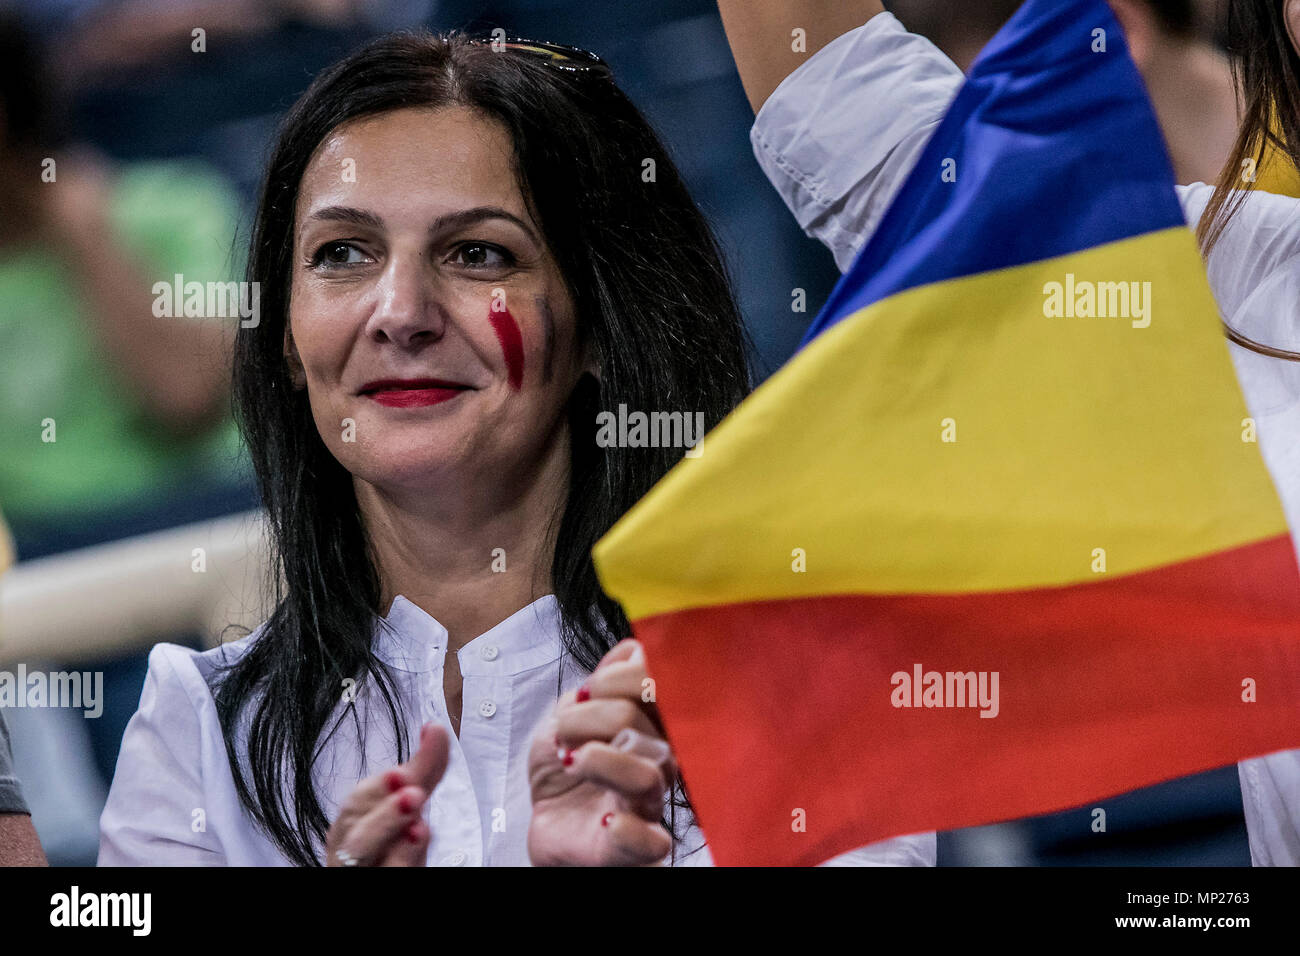 Athens, Greece. 20th May, 2018. AHC Potaissa Turda's fan reacts during the EHF Men's Challenge Cup Finals between A.E.K. Athens and AHC Potaissa Turda in Athens, Greece, May 20, 2018. Credit: Panagiotis Moschandreou/Xinhua/Alamy Live News Stock Photo